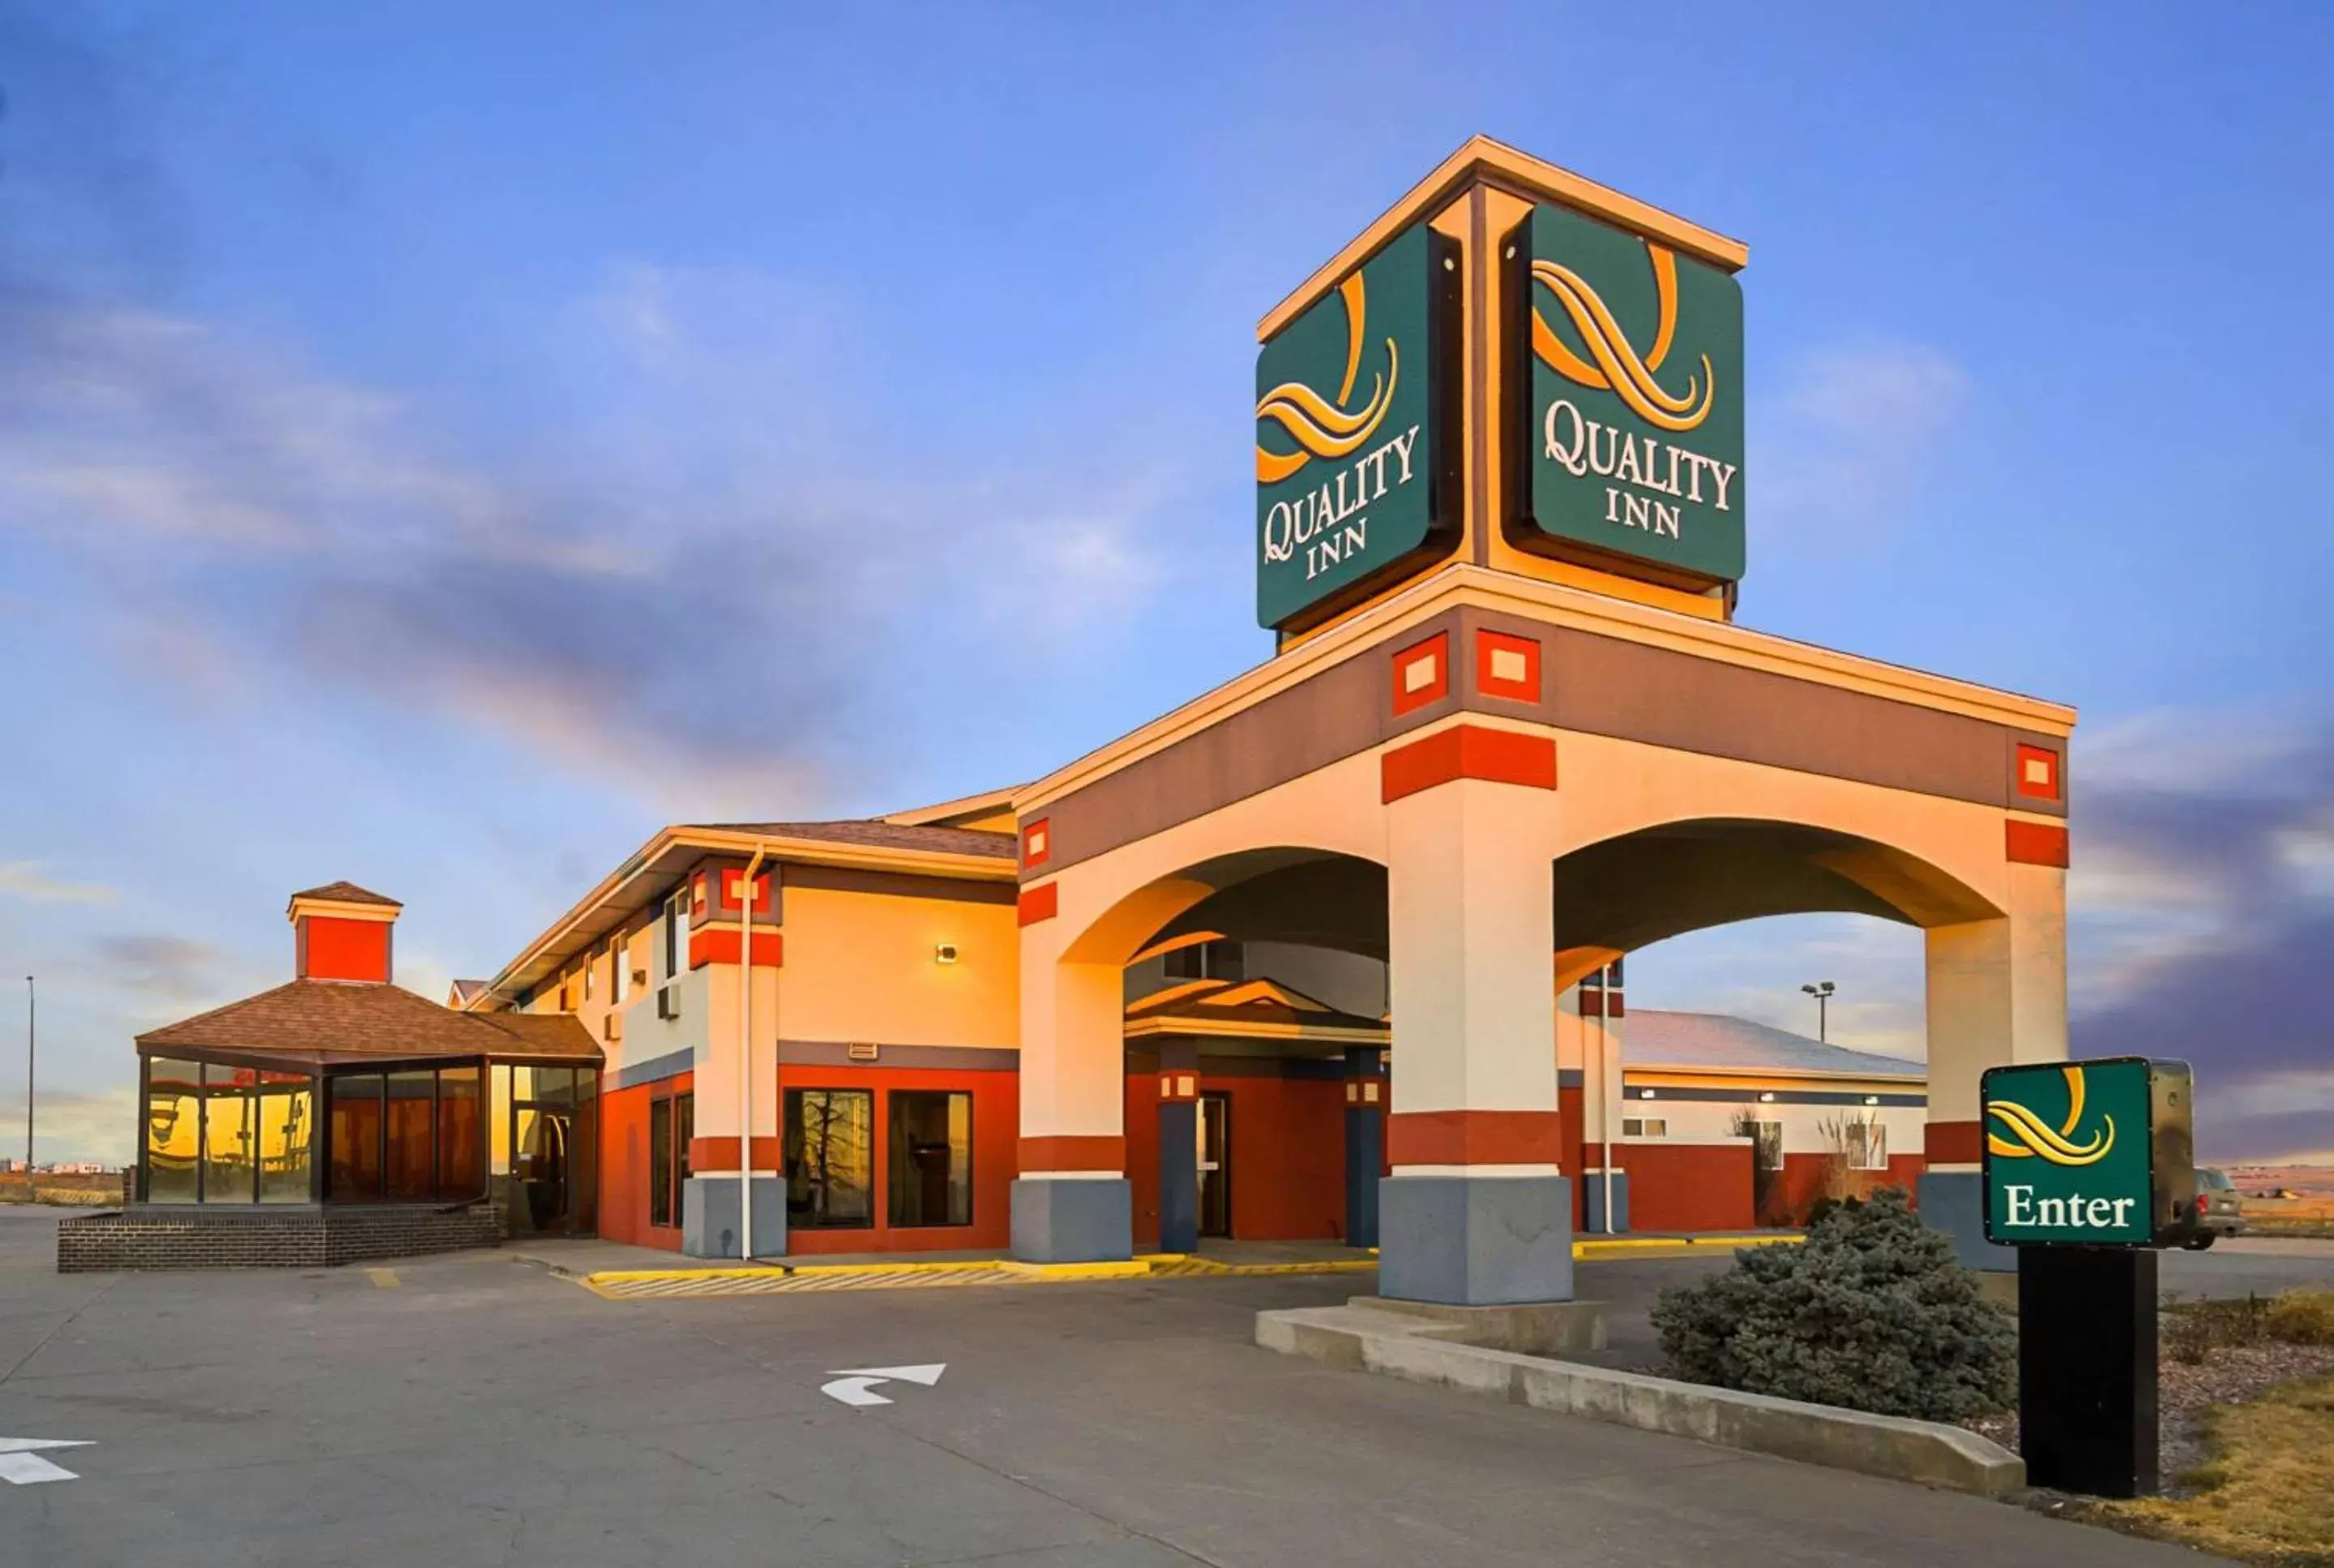 Property building in Quality Inn Sidney I-80